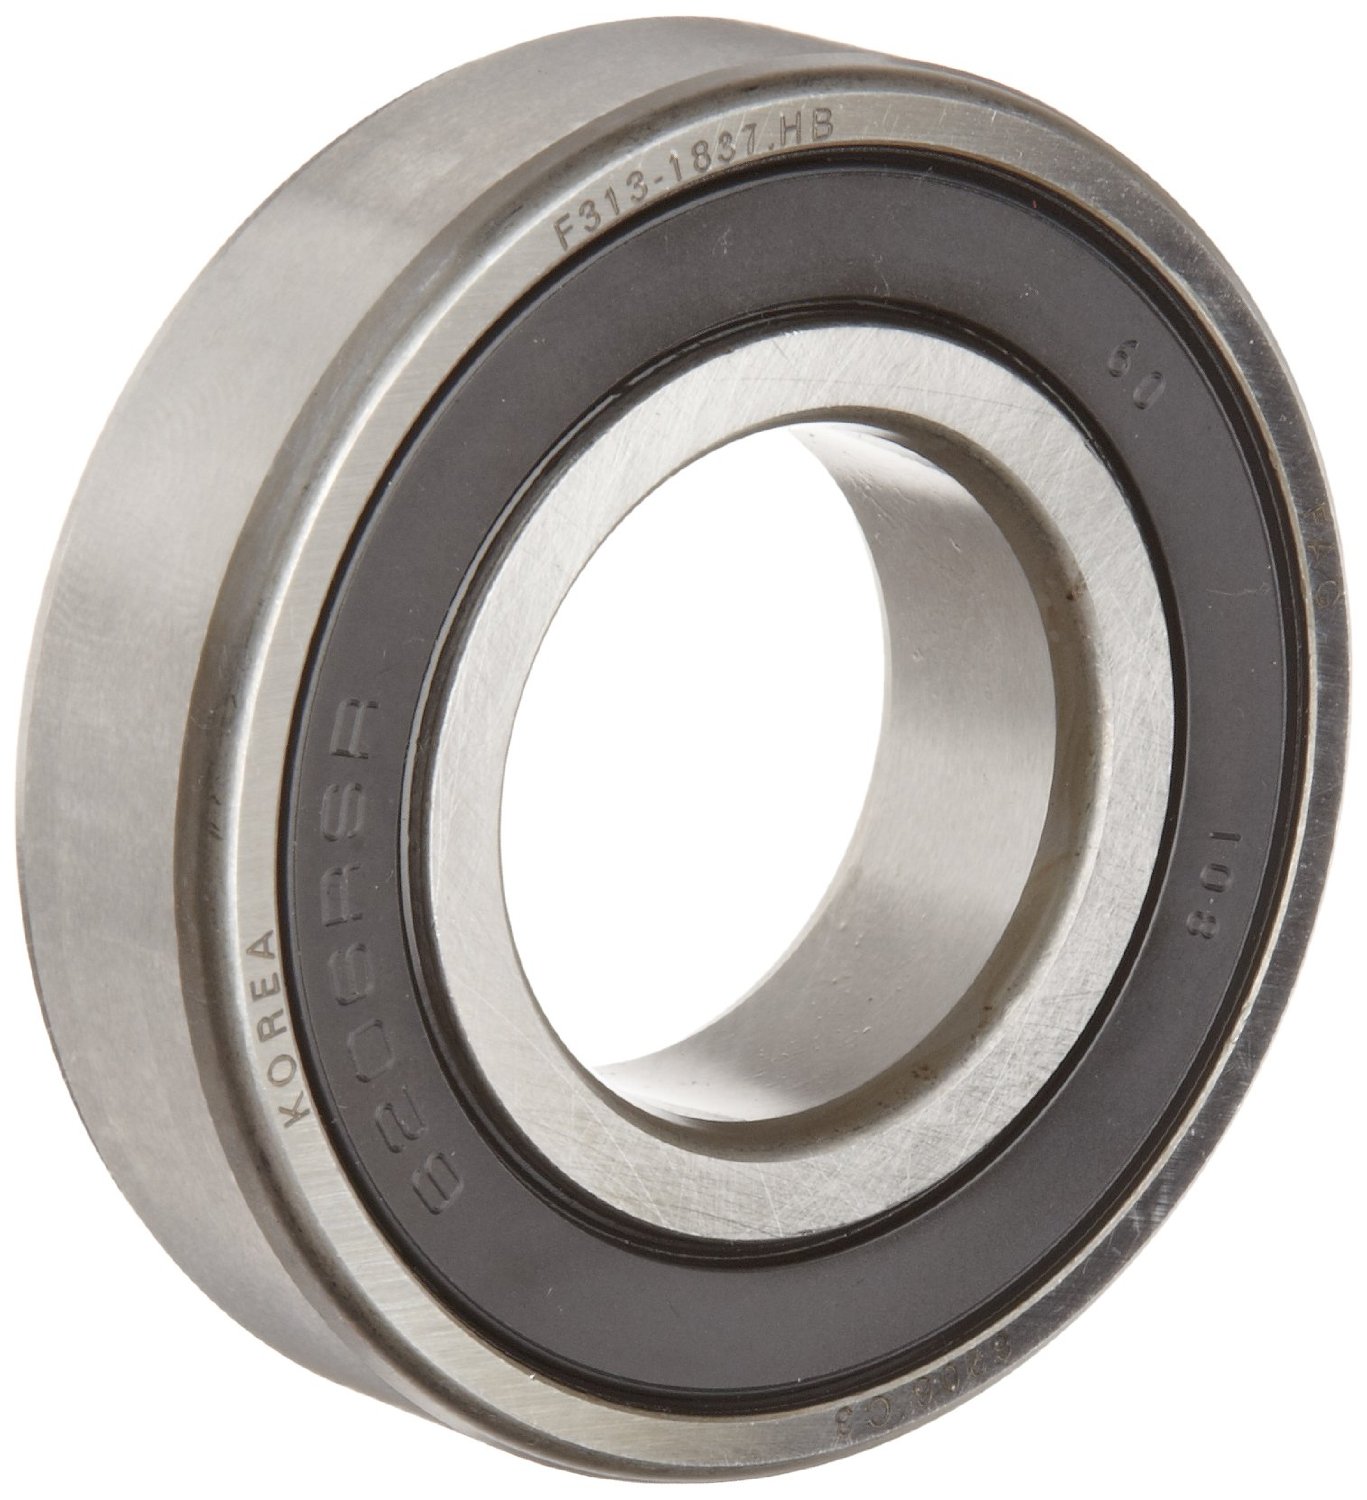 FAG 6213-2RSR-C3 Deep Groove Ball Bearing, Single Row, Double Sealed, Steel Cage, C3 Clearance, Metric, 65mm ID, 120mm OD, 23mm Width, 3600rpm Maximum Rotational Speed, 9110lbf Static Load Capacity, 12600lbf Dynamic Load Capacity